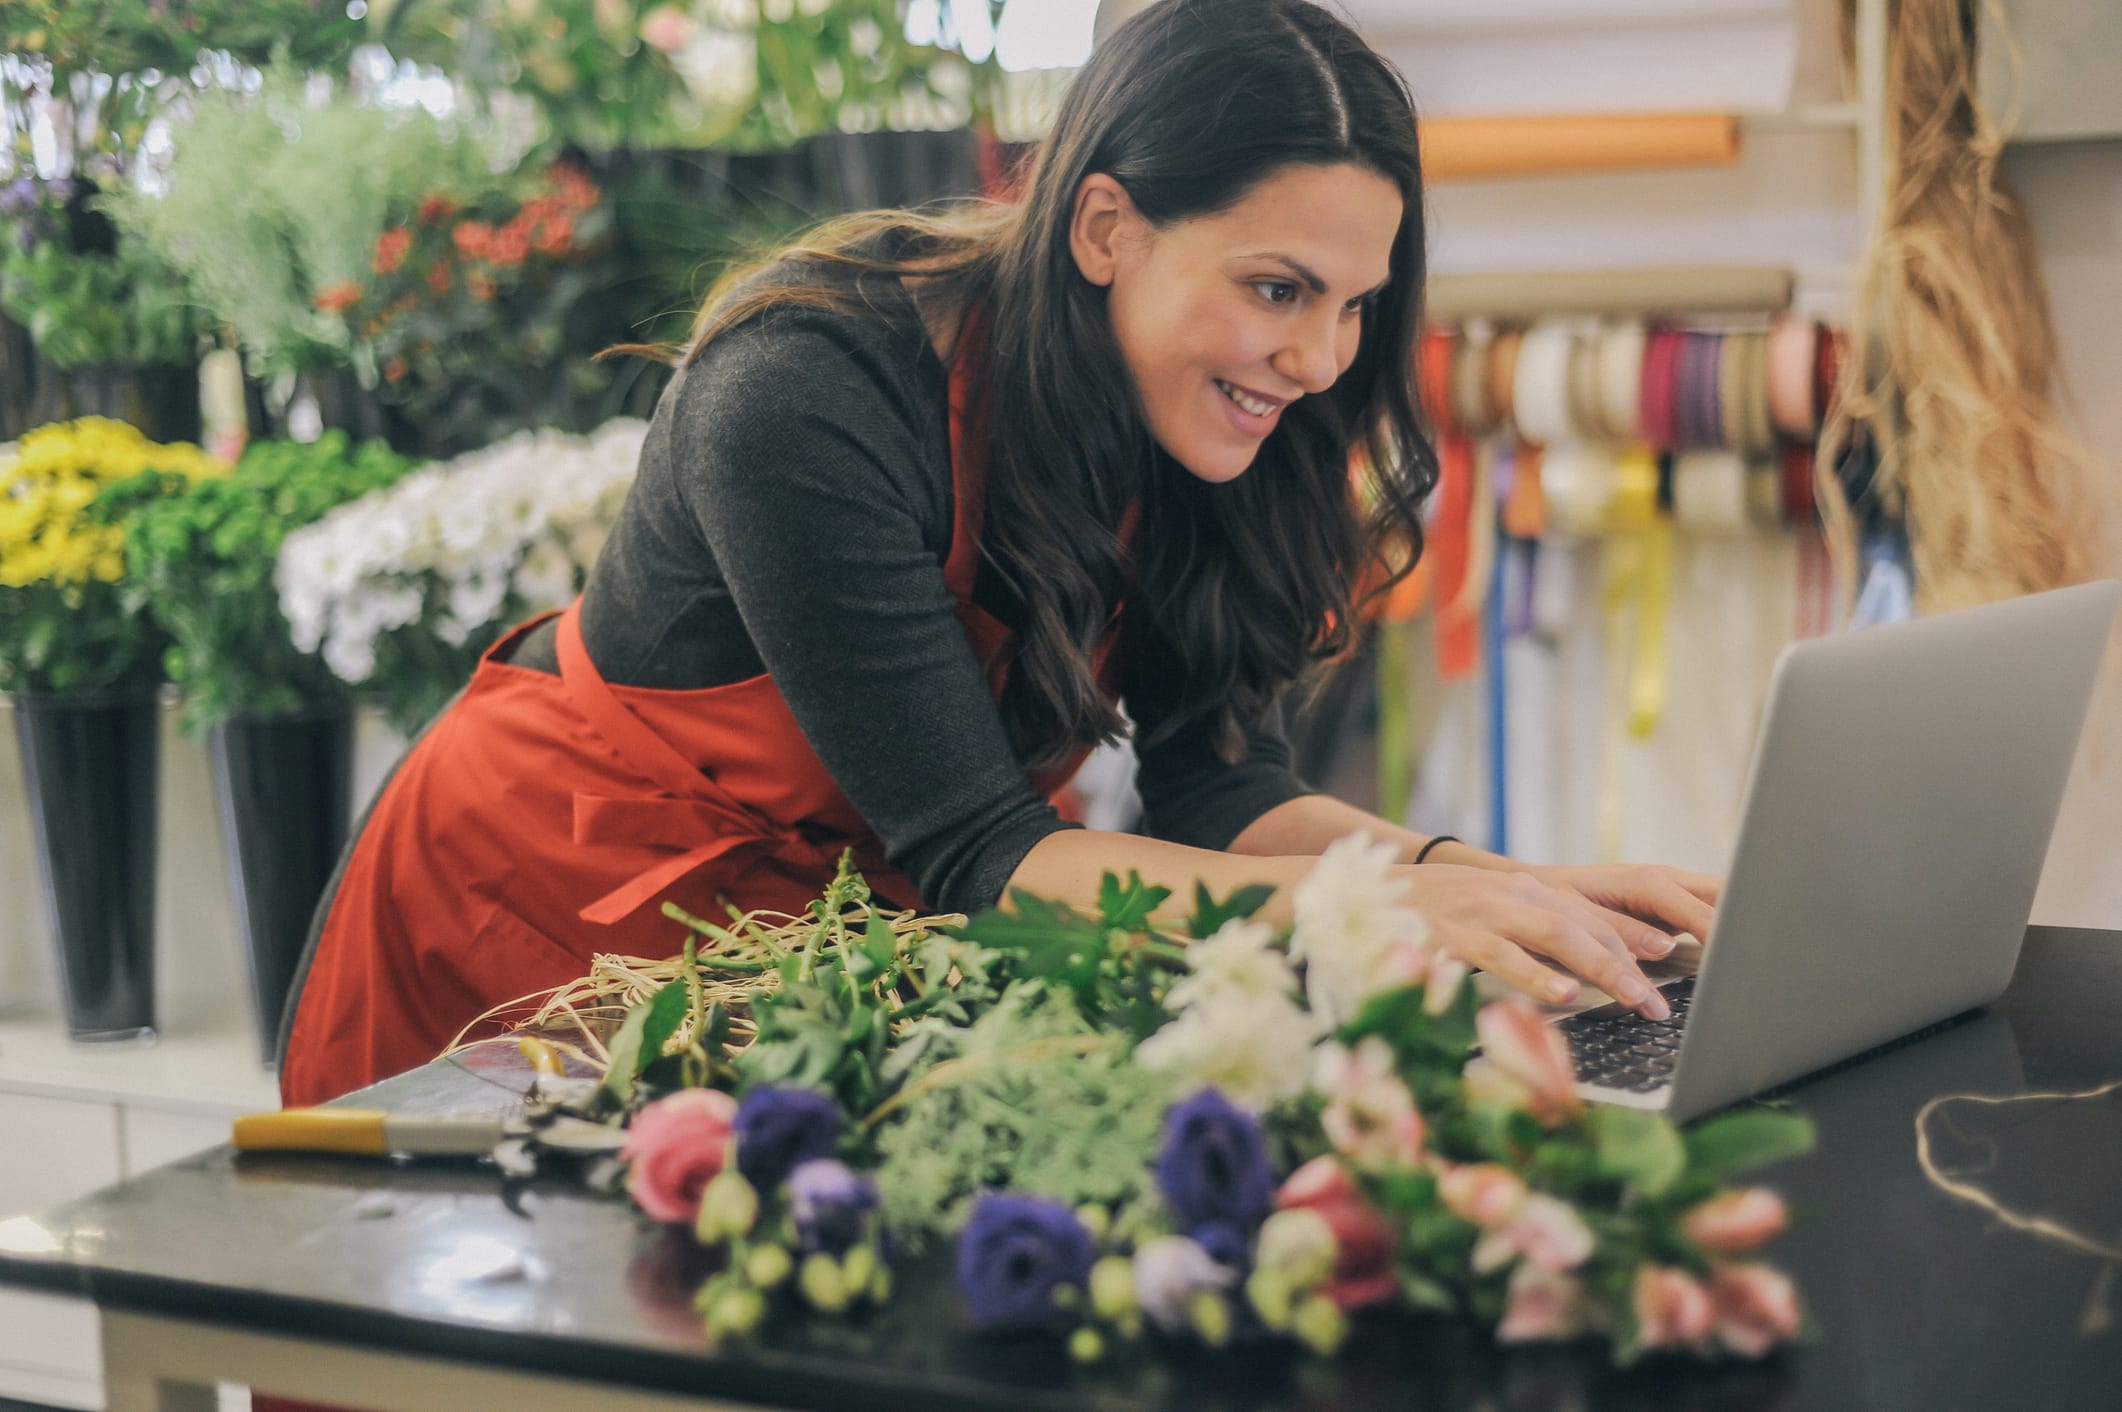 A woman uses her laptop while in a florist shop.